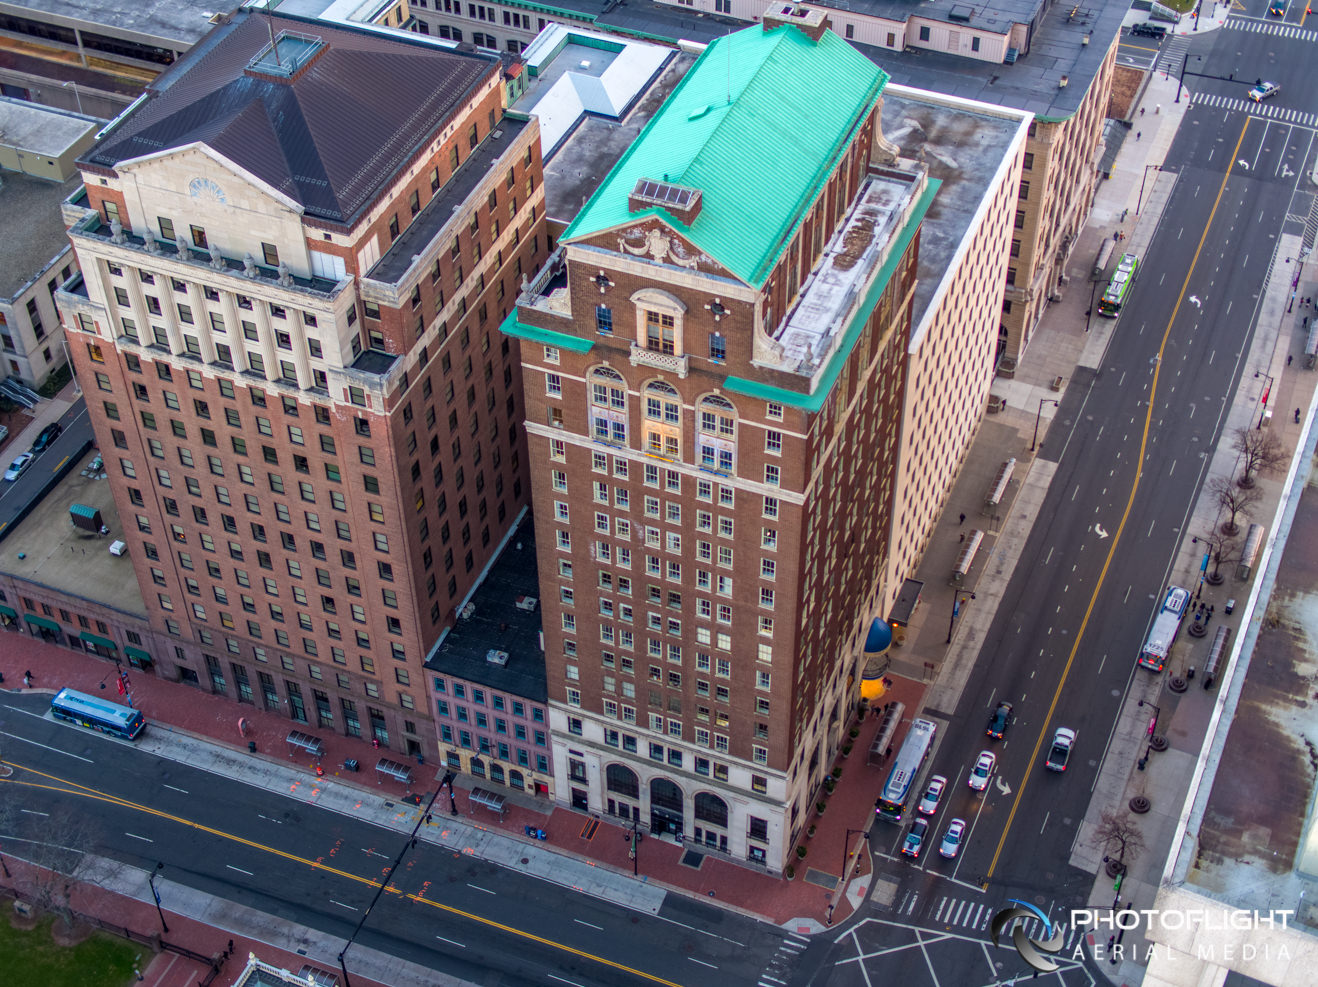 Aerial Architectural Photography in downtown Connecticut